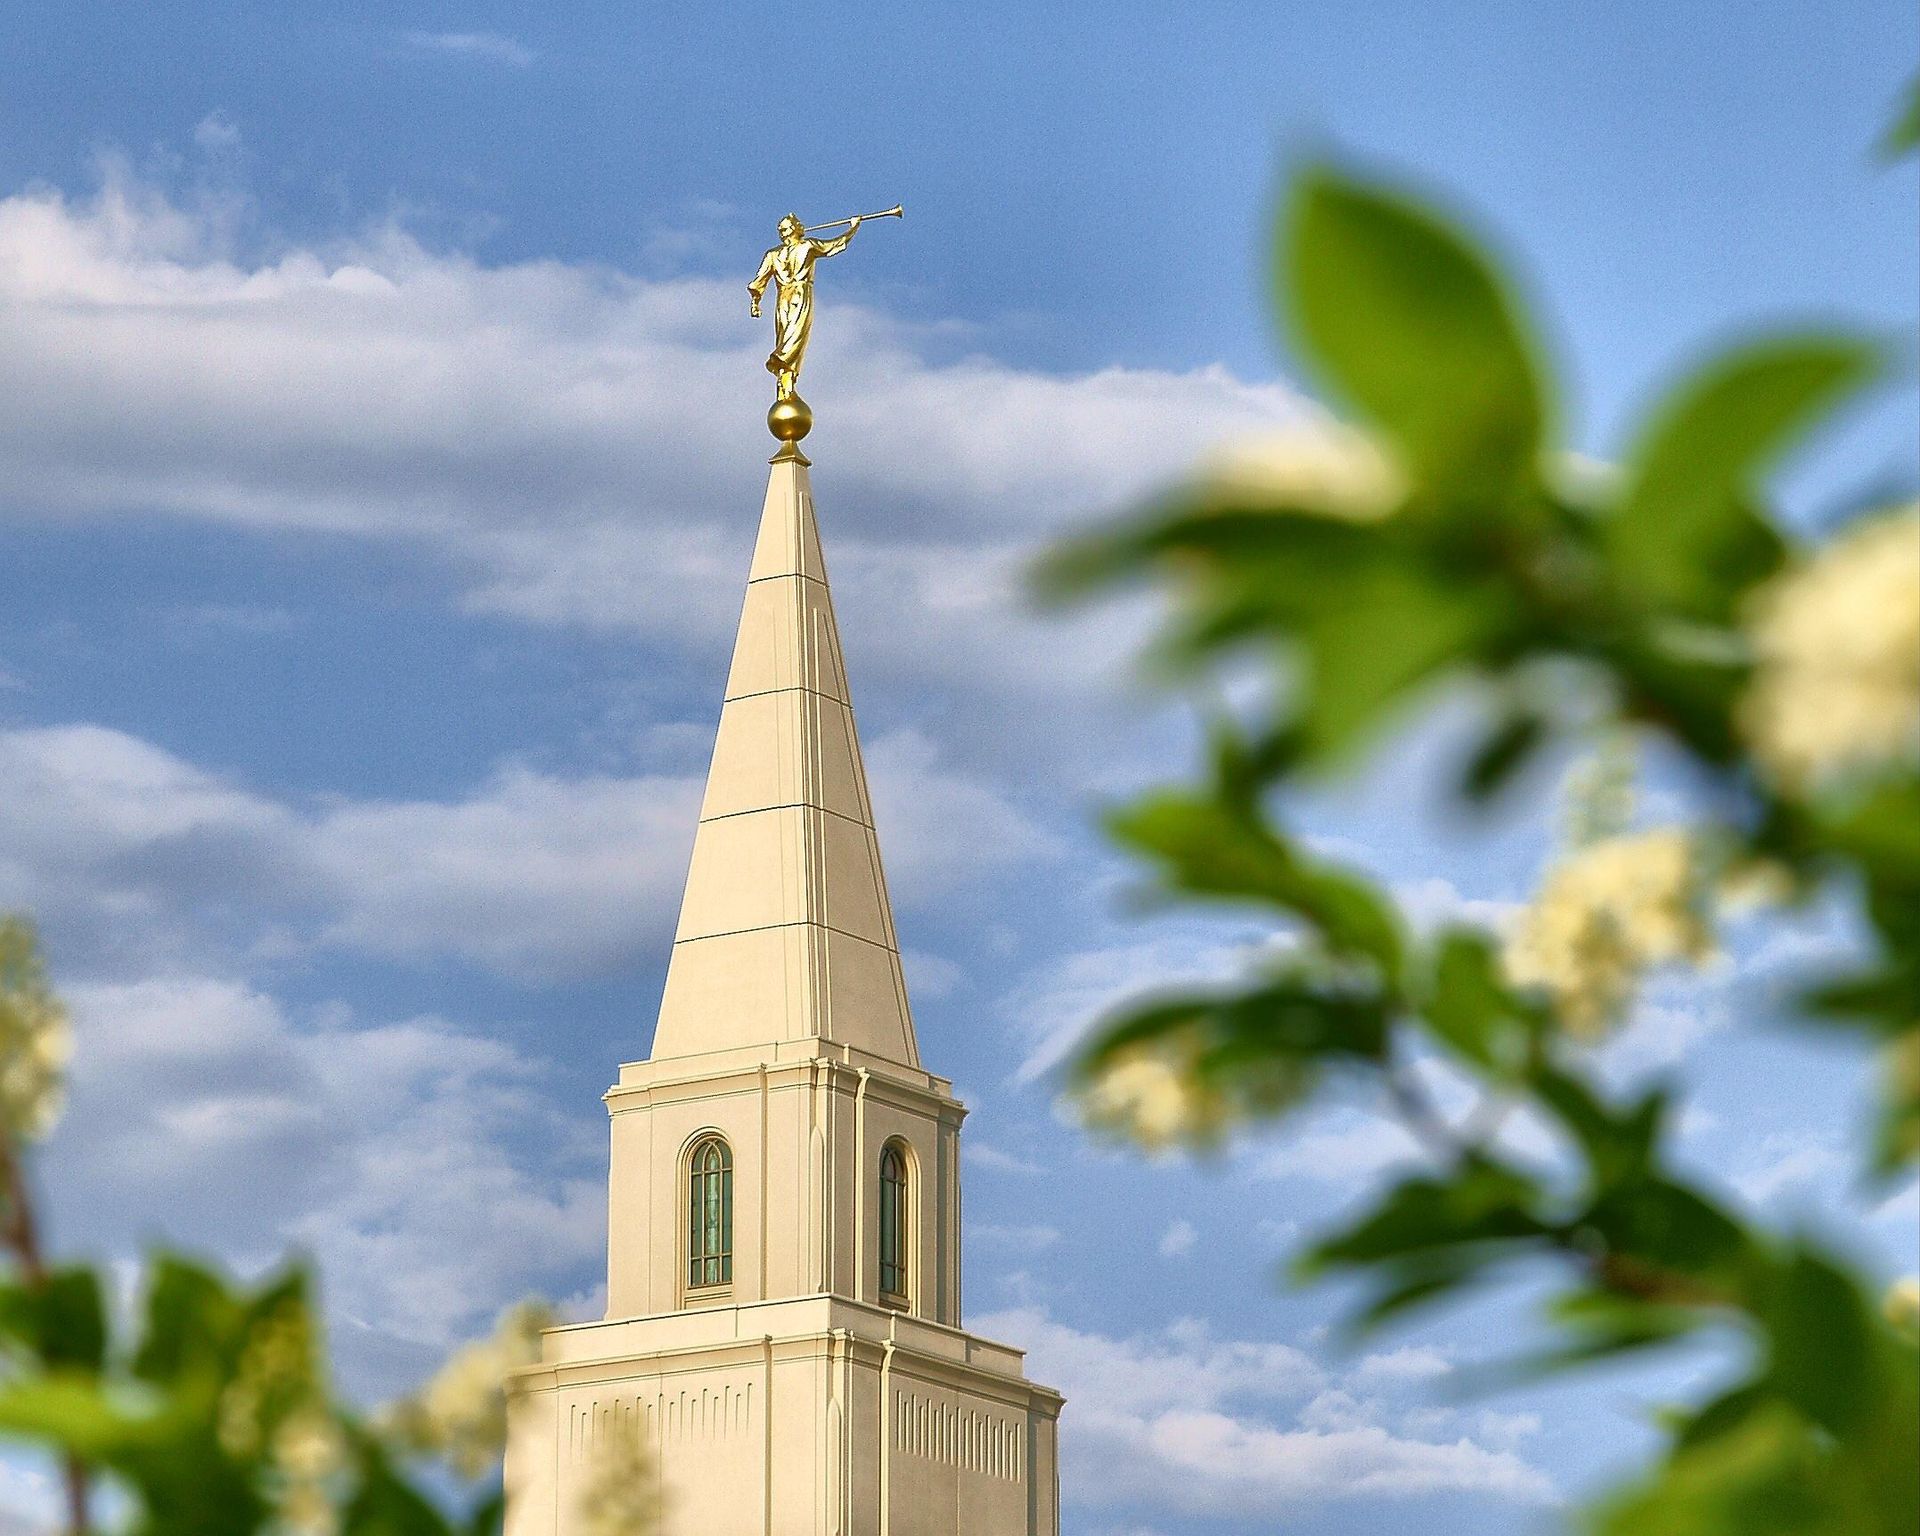 A view of the Kansas City Missouri Temple spire, with the angel Moroni standing on top.